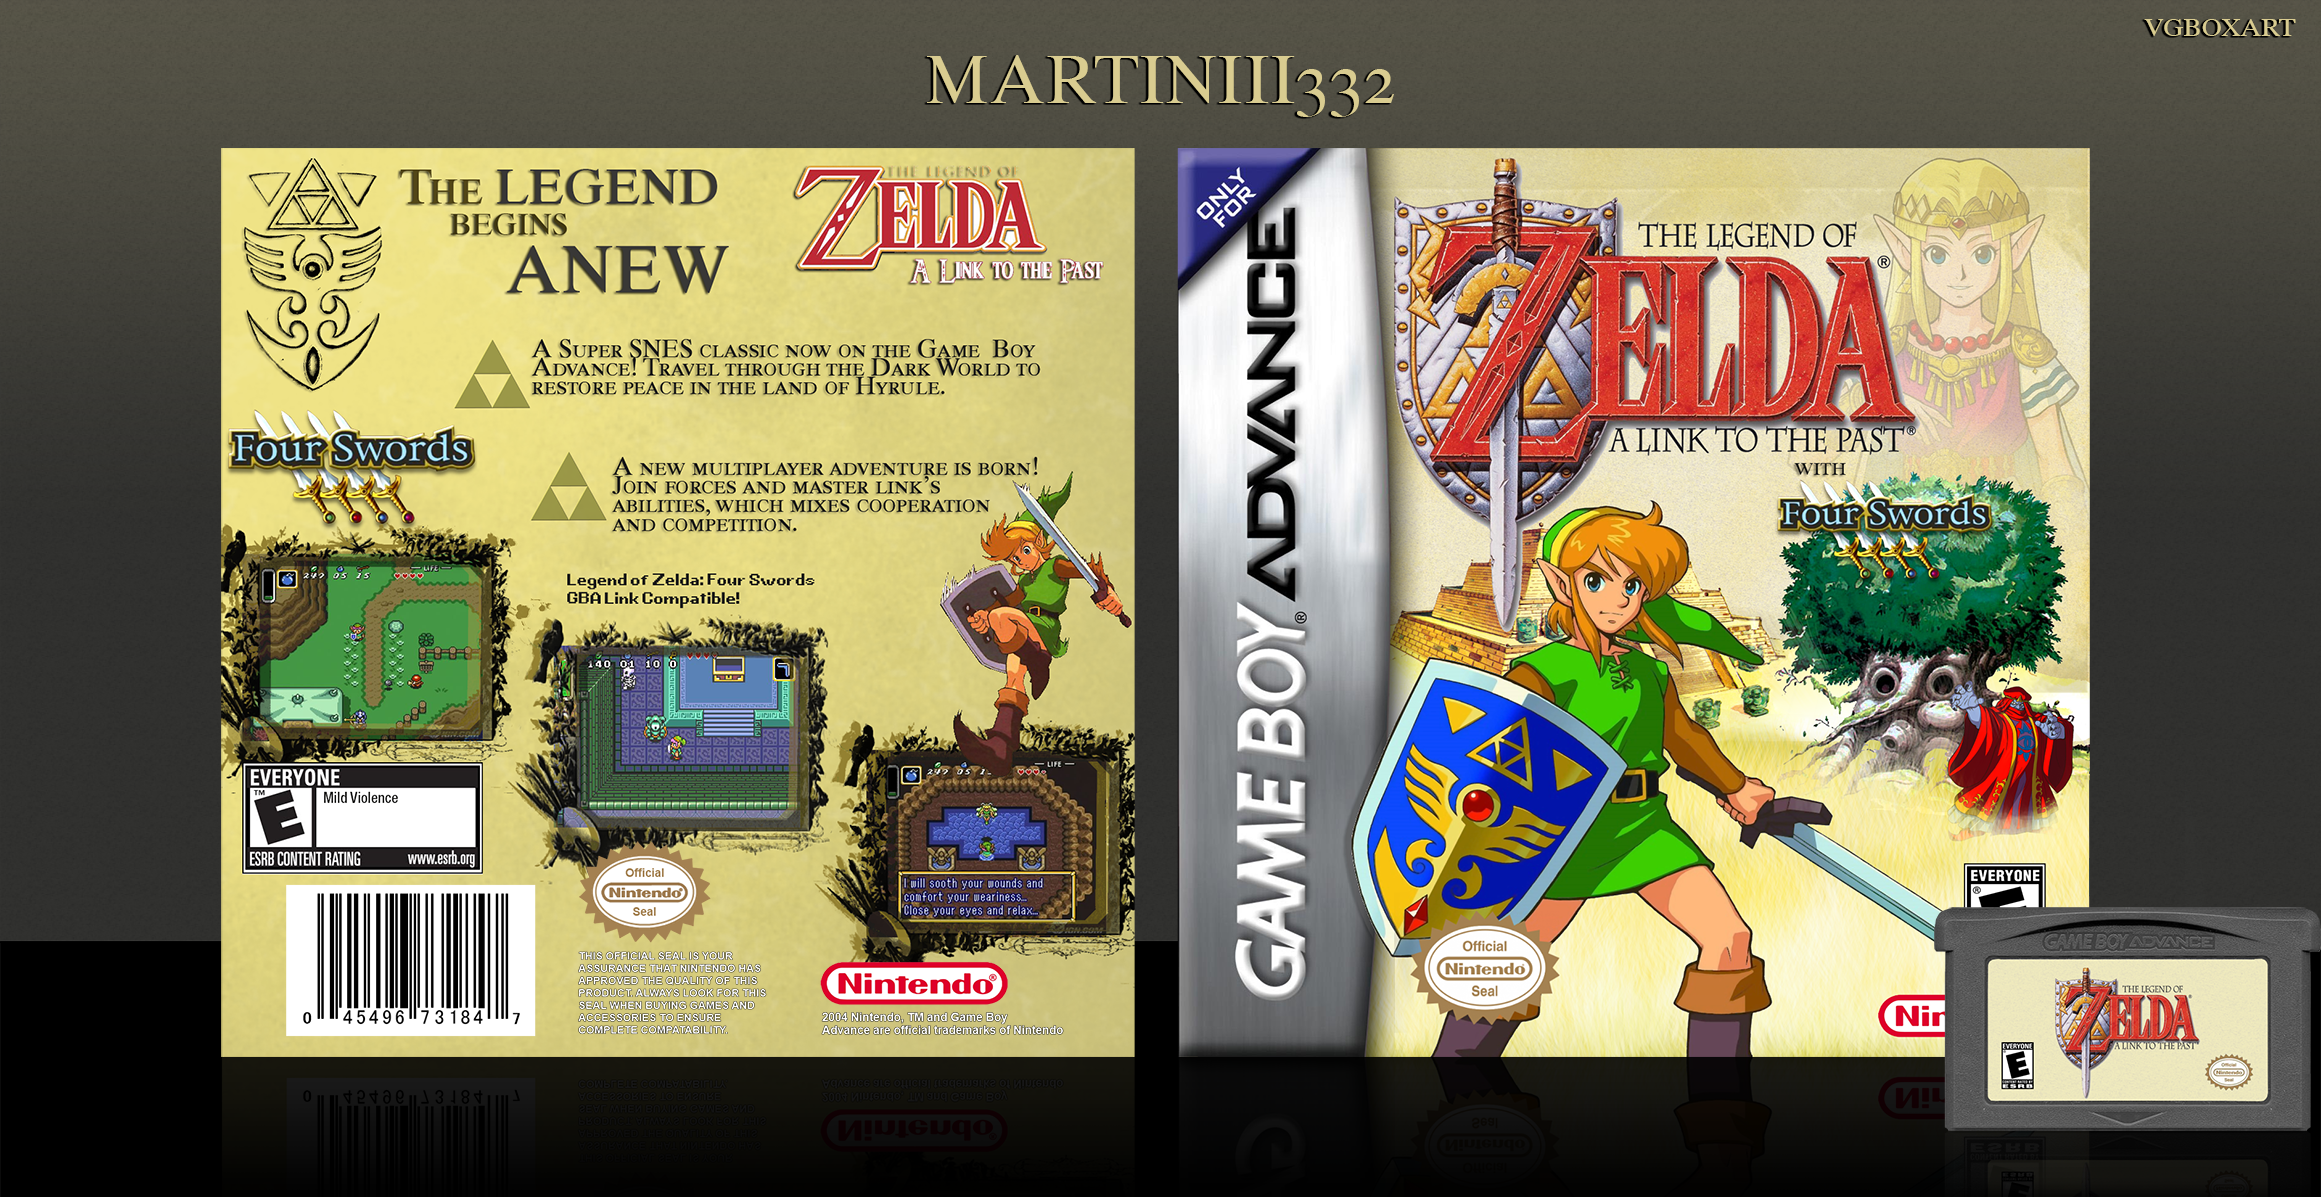 Legend of Zelda: A Link to the Past, The (GBA) - The Cover Project